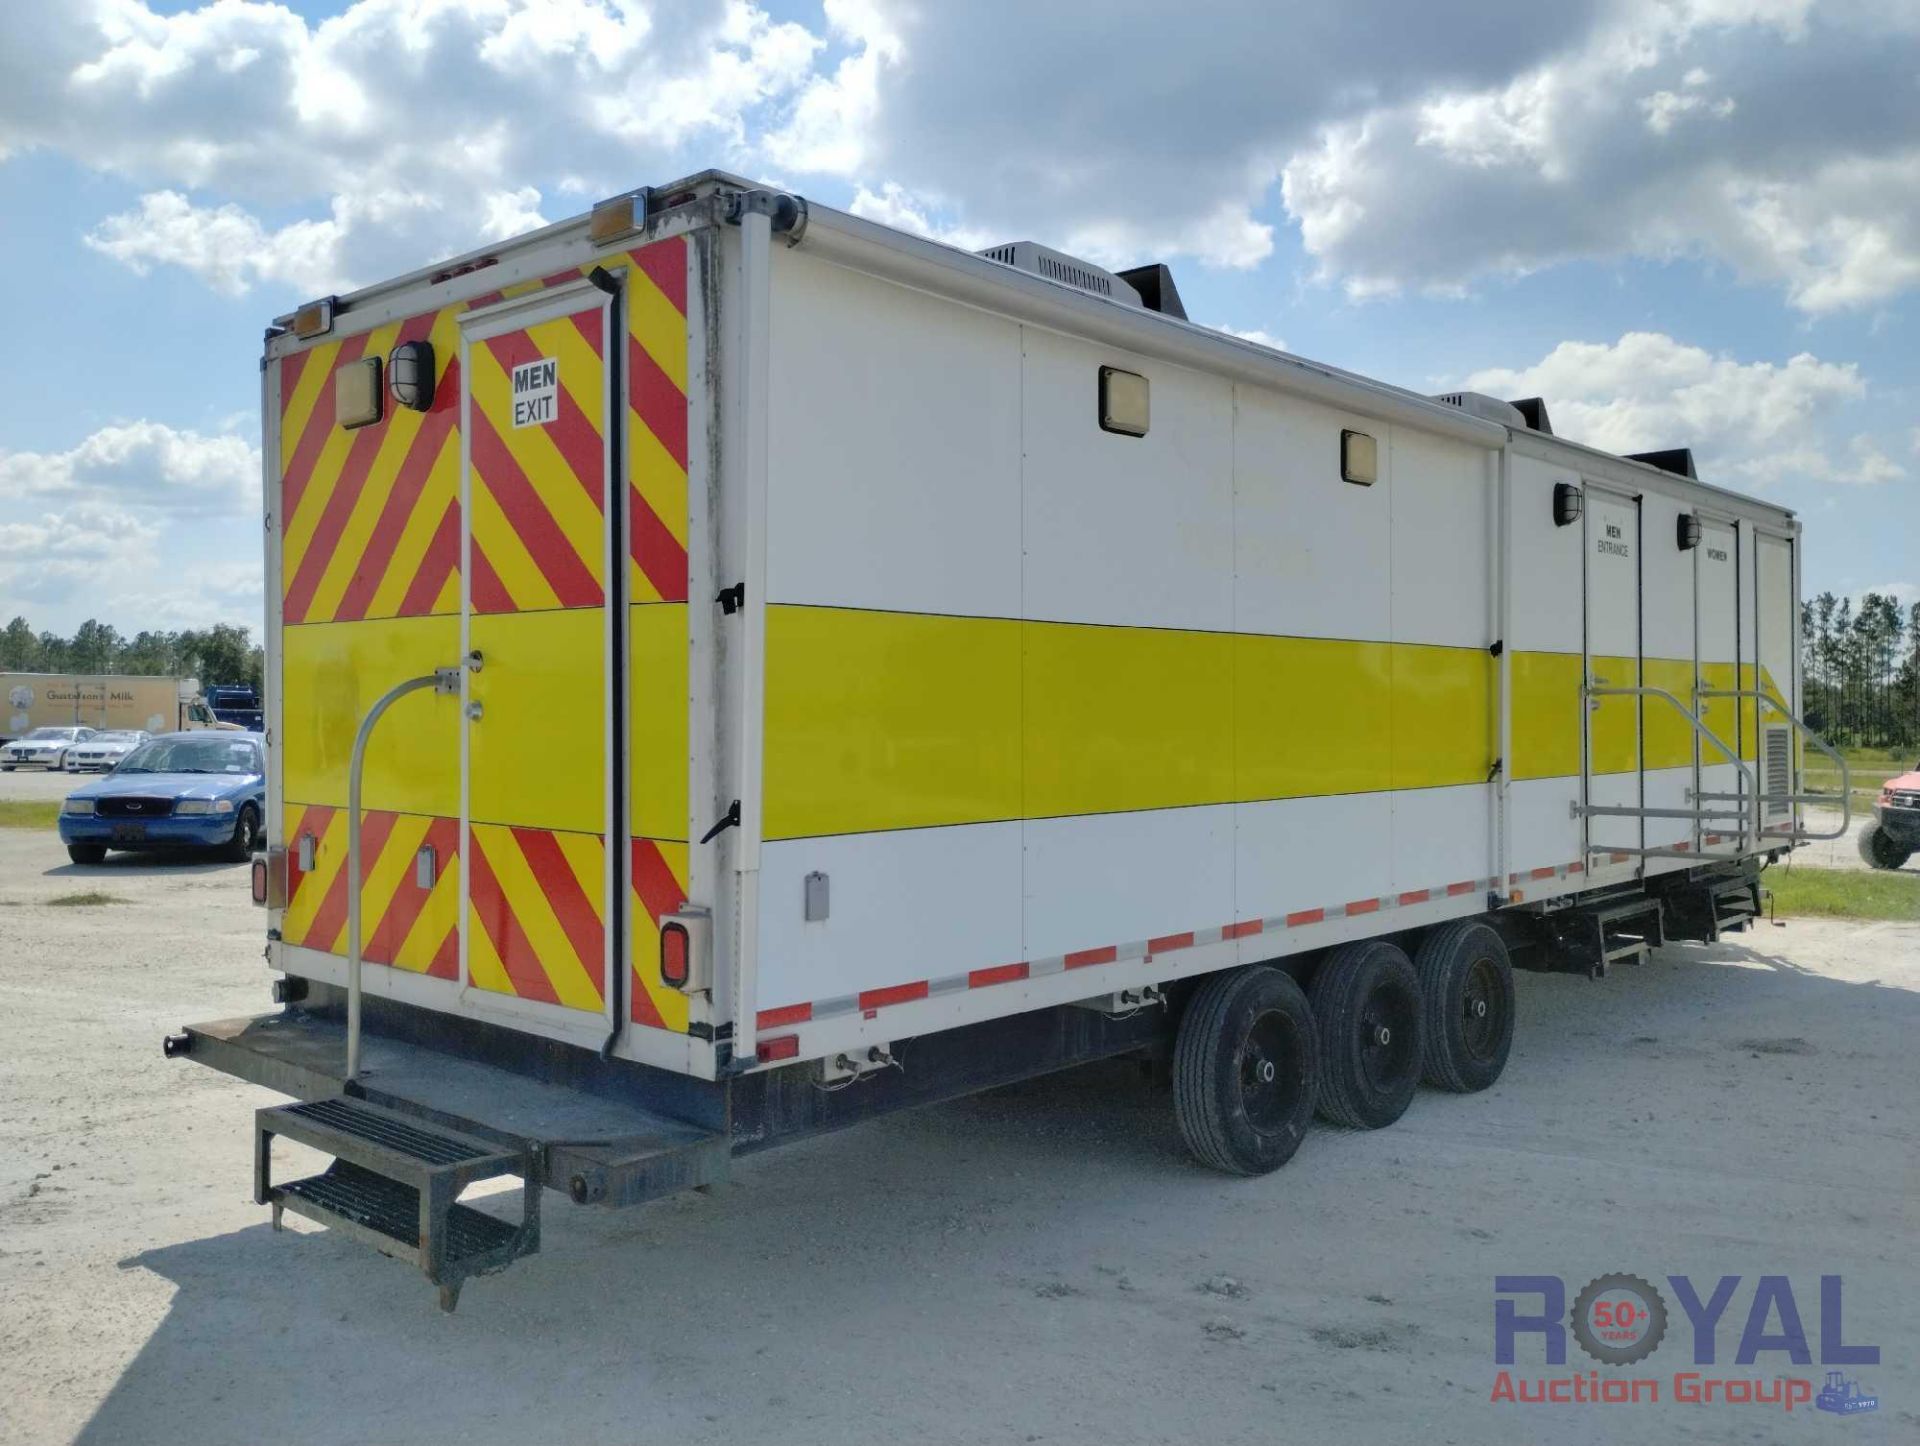 Fire/Rescue Portable Bathroom and Shower Trailer - Image 5 of 50